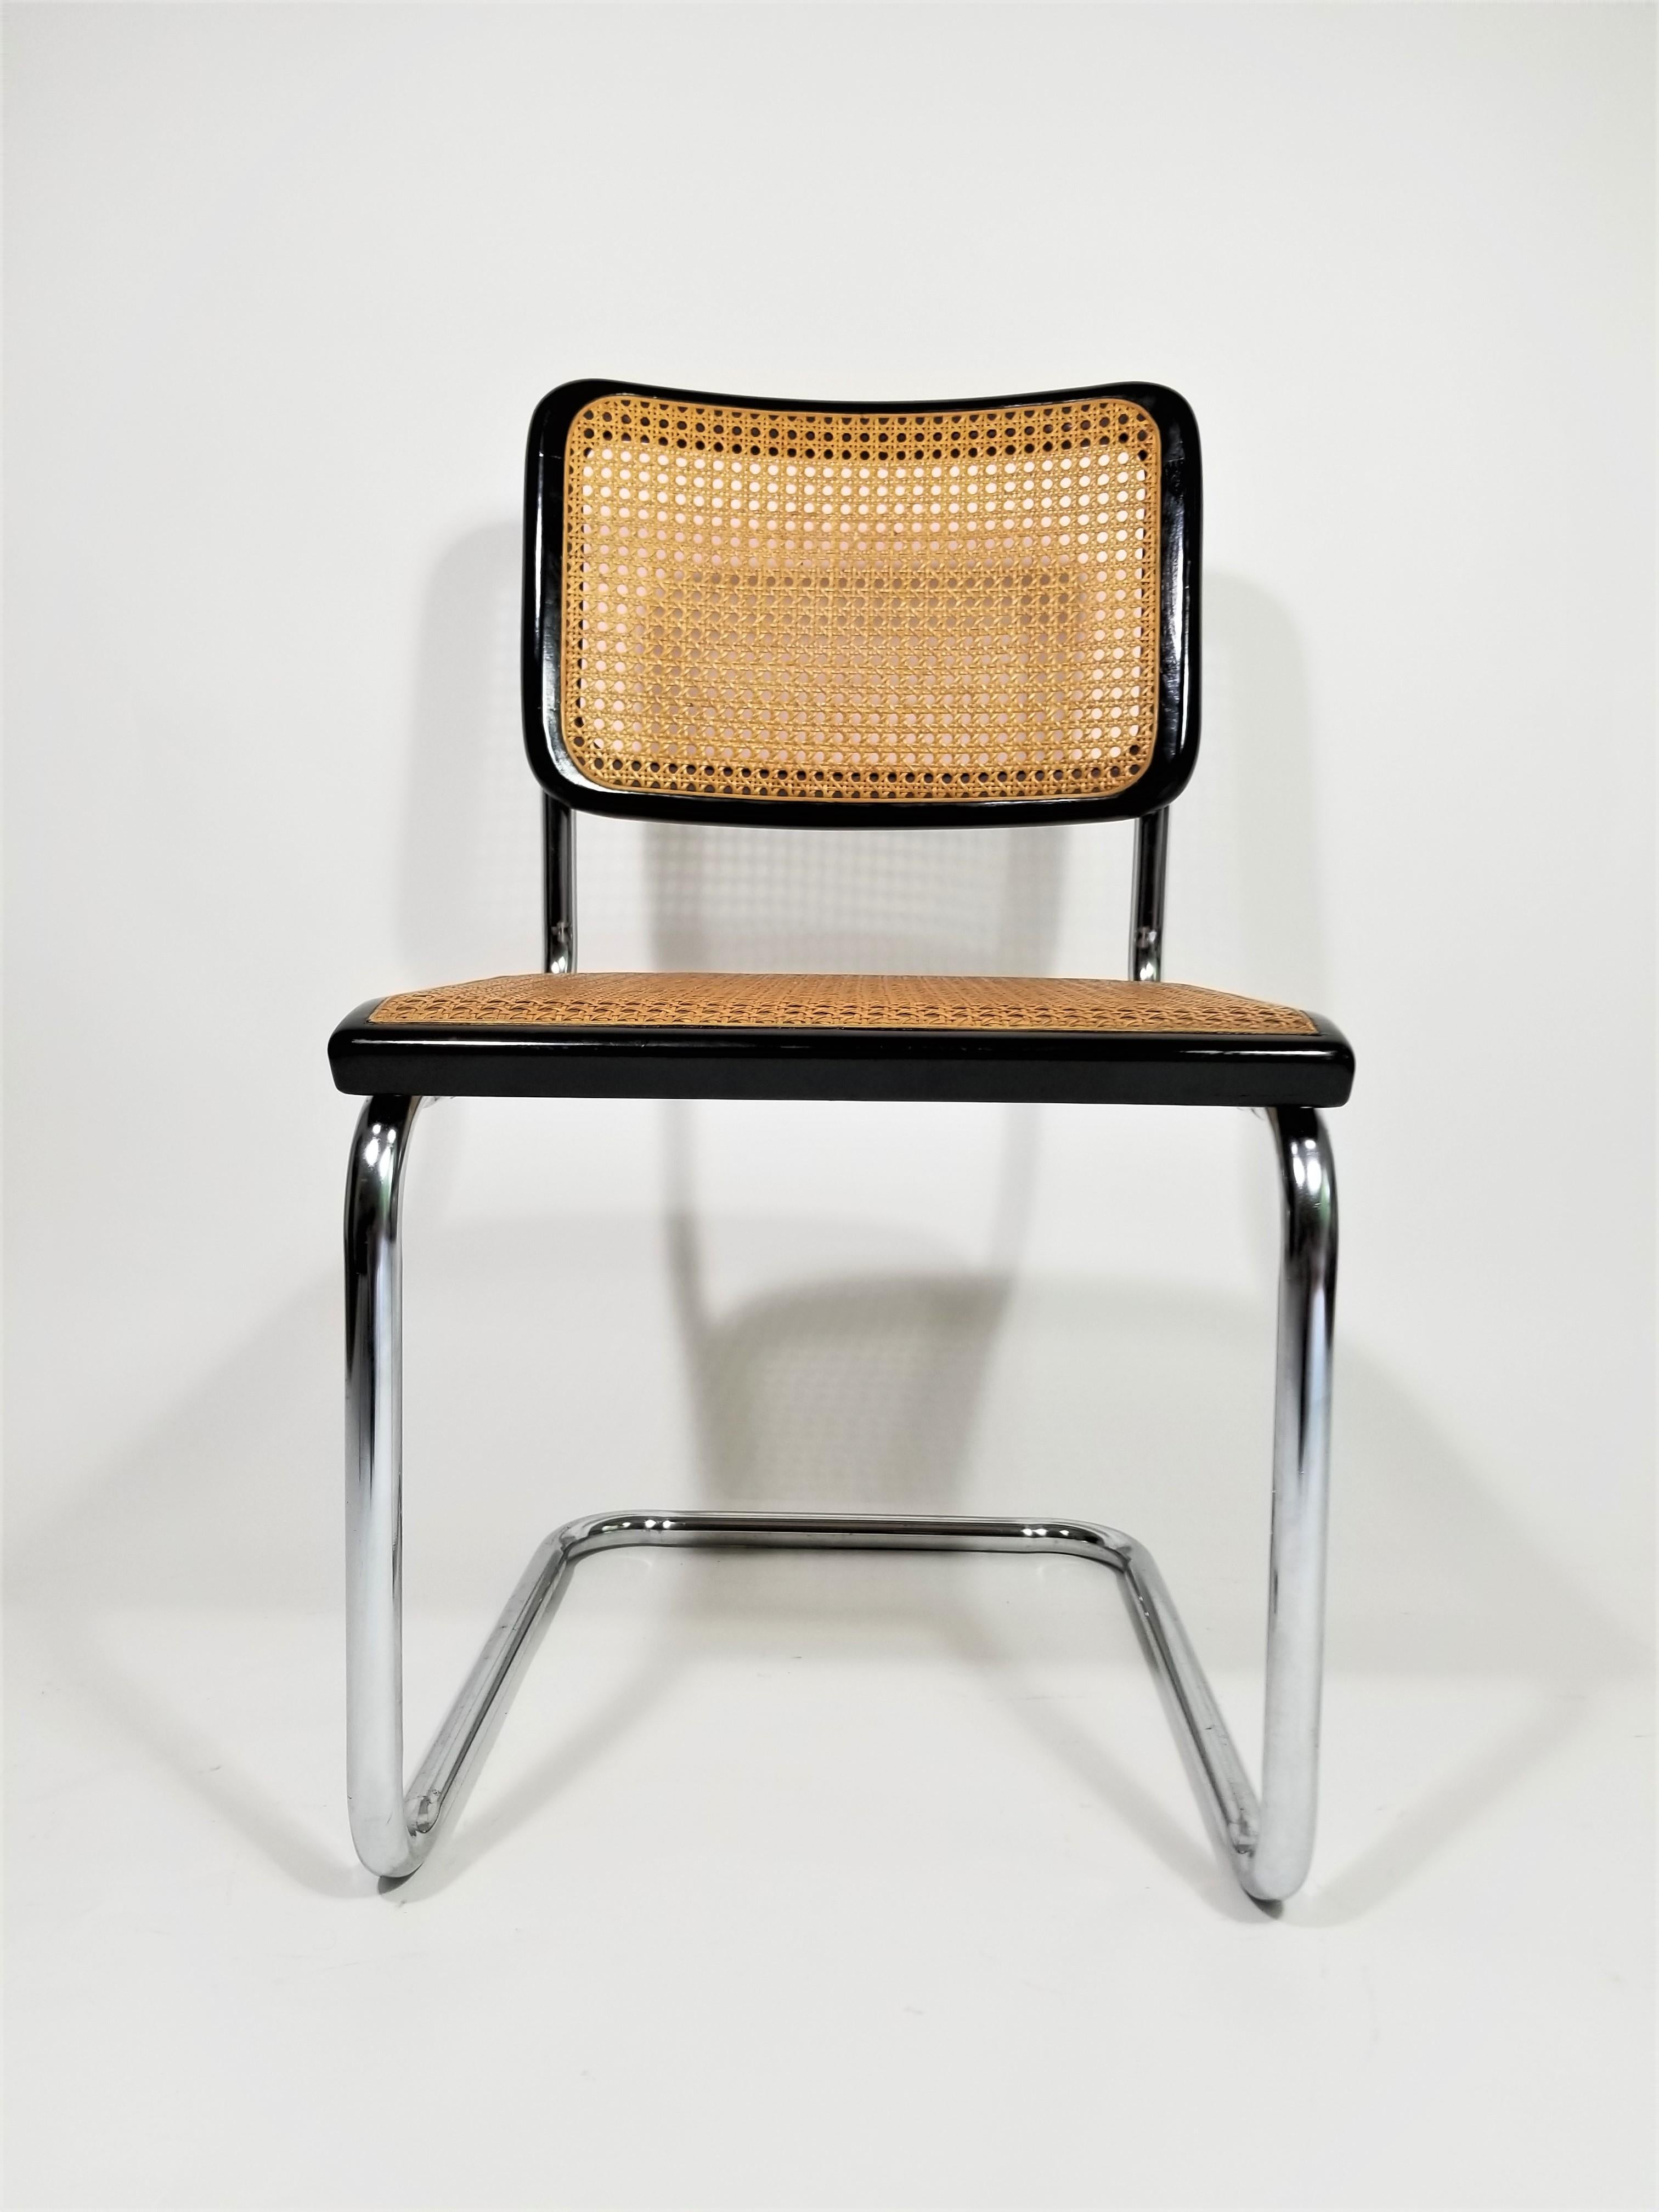 Authentic 1960s Mid Century Thonet Marcel Breuer Cesca Side Chair with Black Finish. Cane Seats and Backs. Classic Chrome Cantilever Frames. 
Made by Thonet New York, NY. Still retains Original Marking Tag.
Complimentary local NYC delivery can be